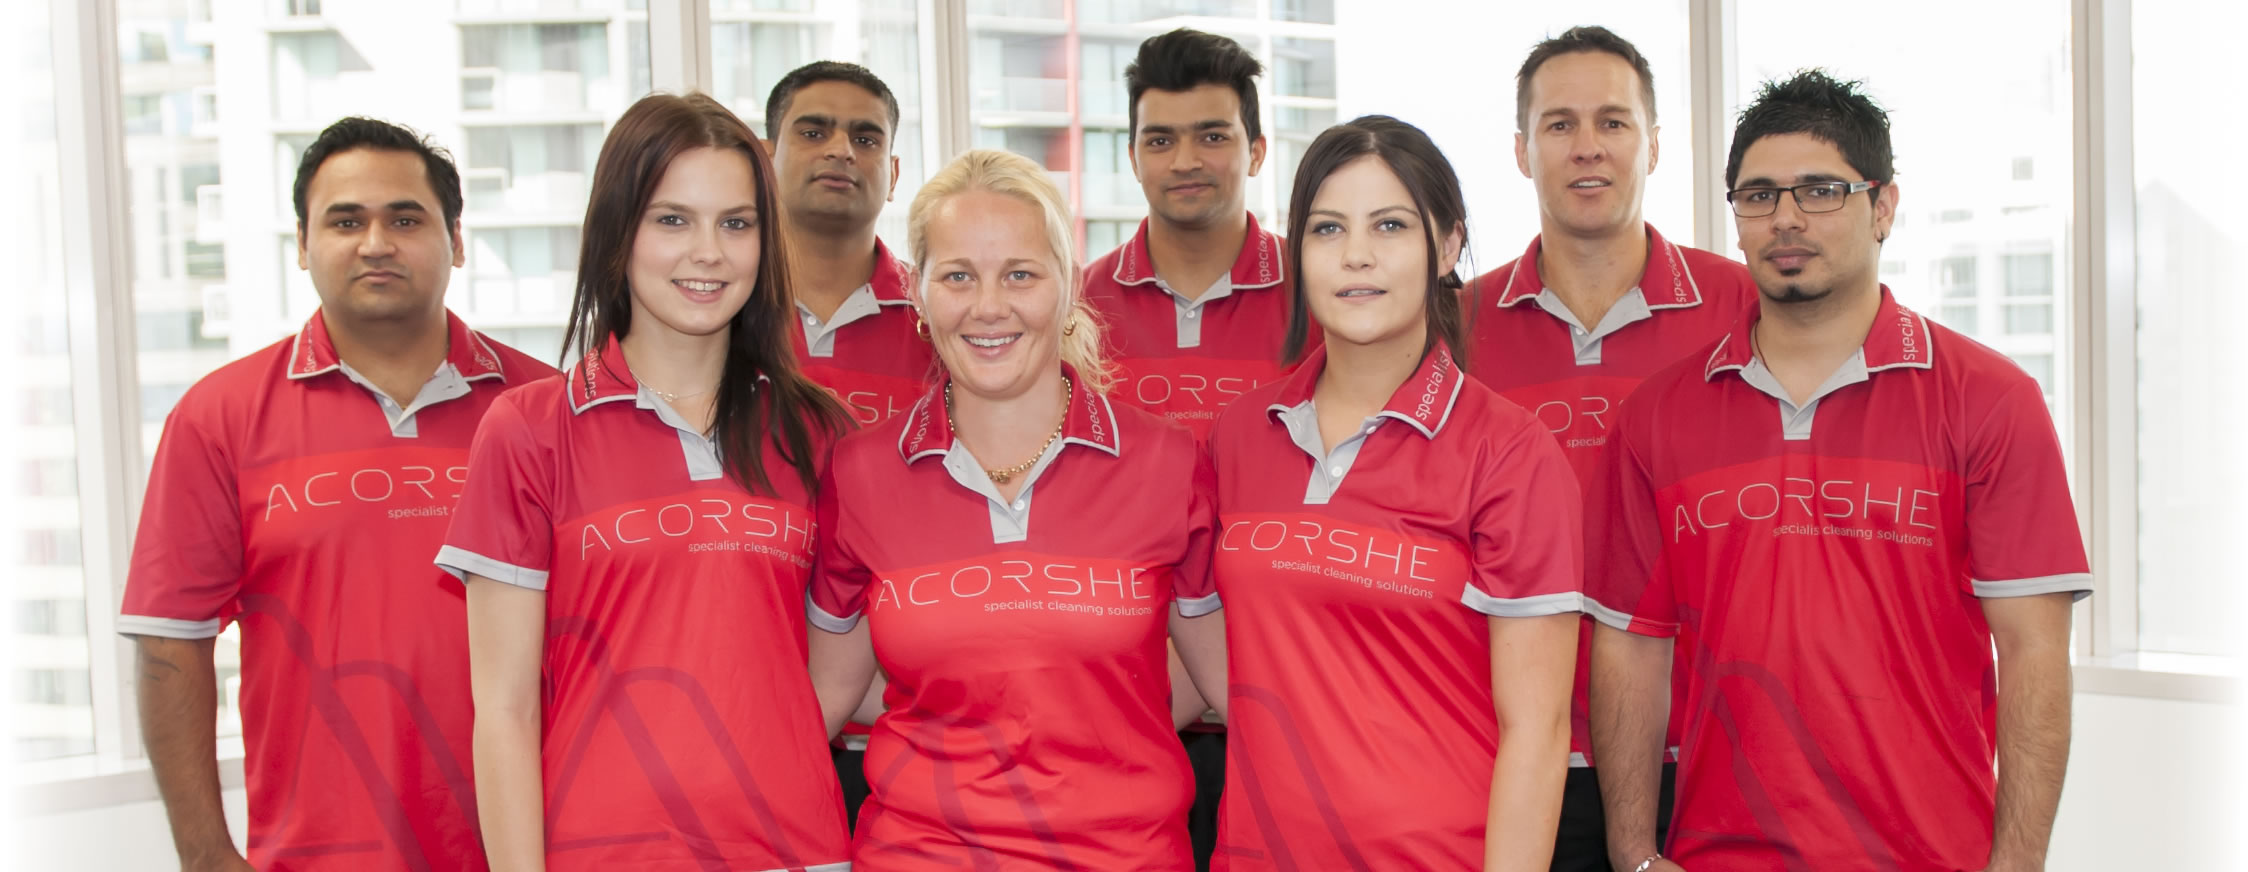 The Acorshe Team